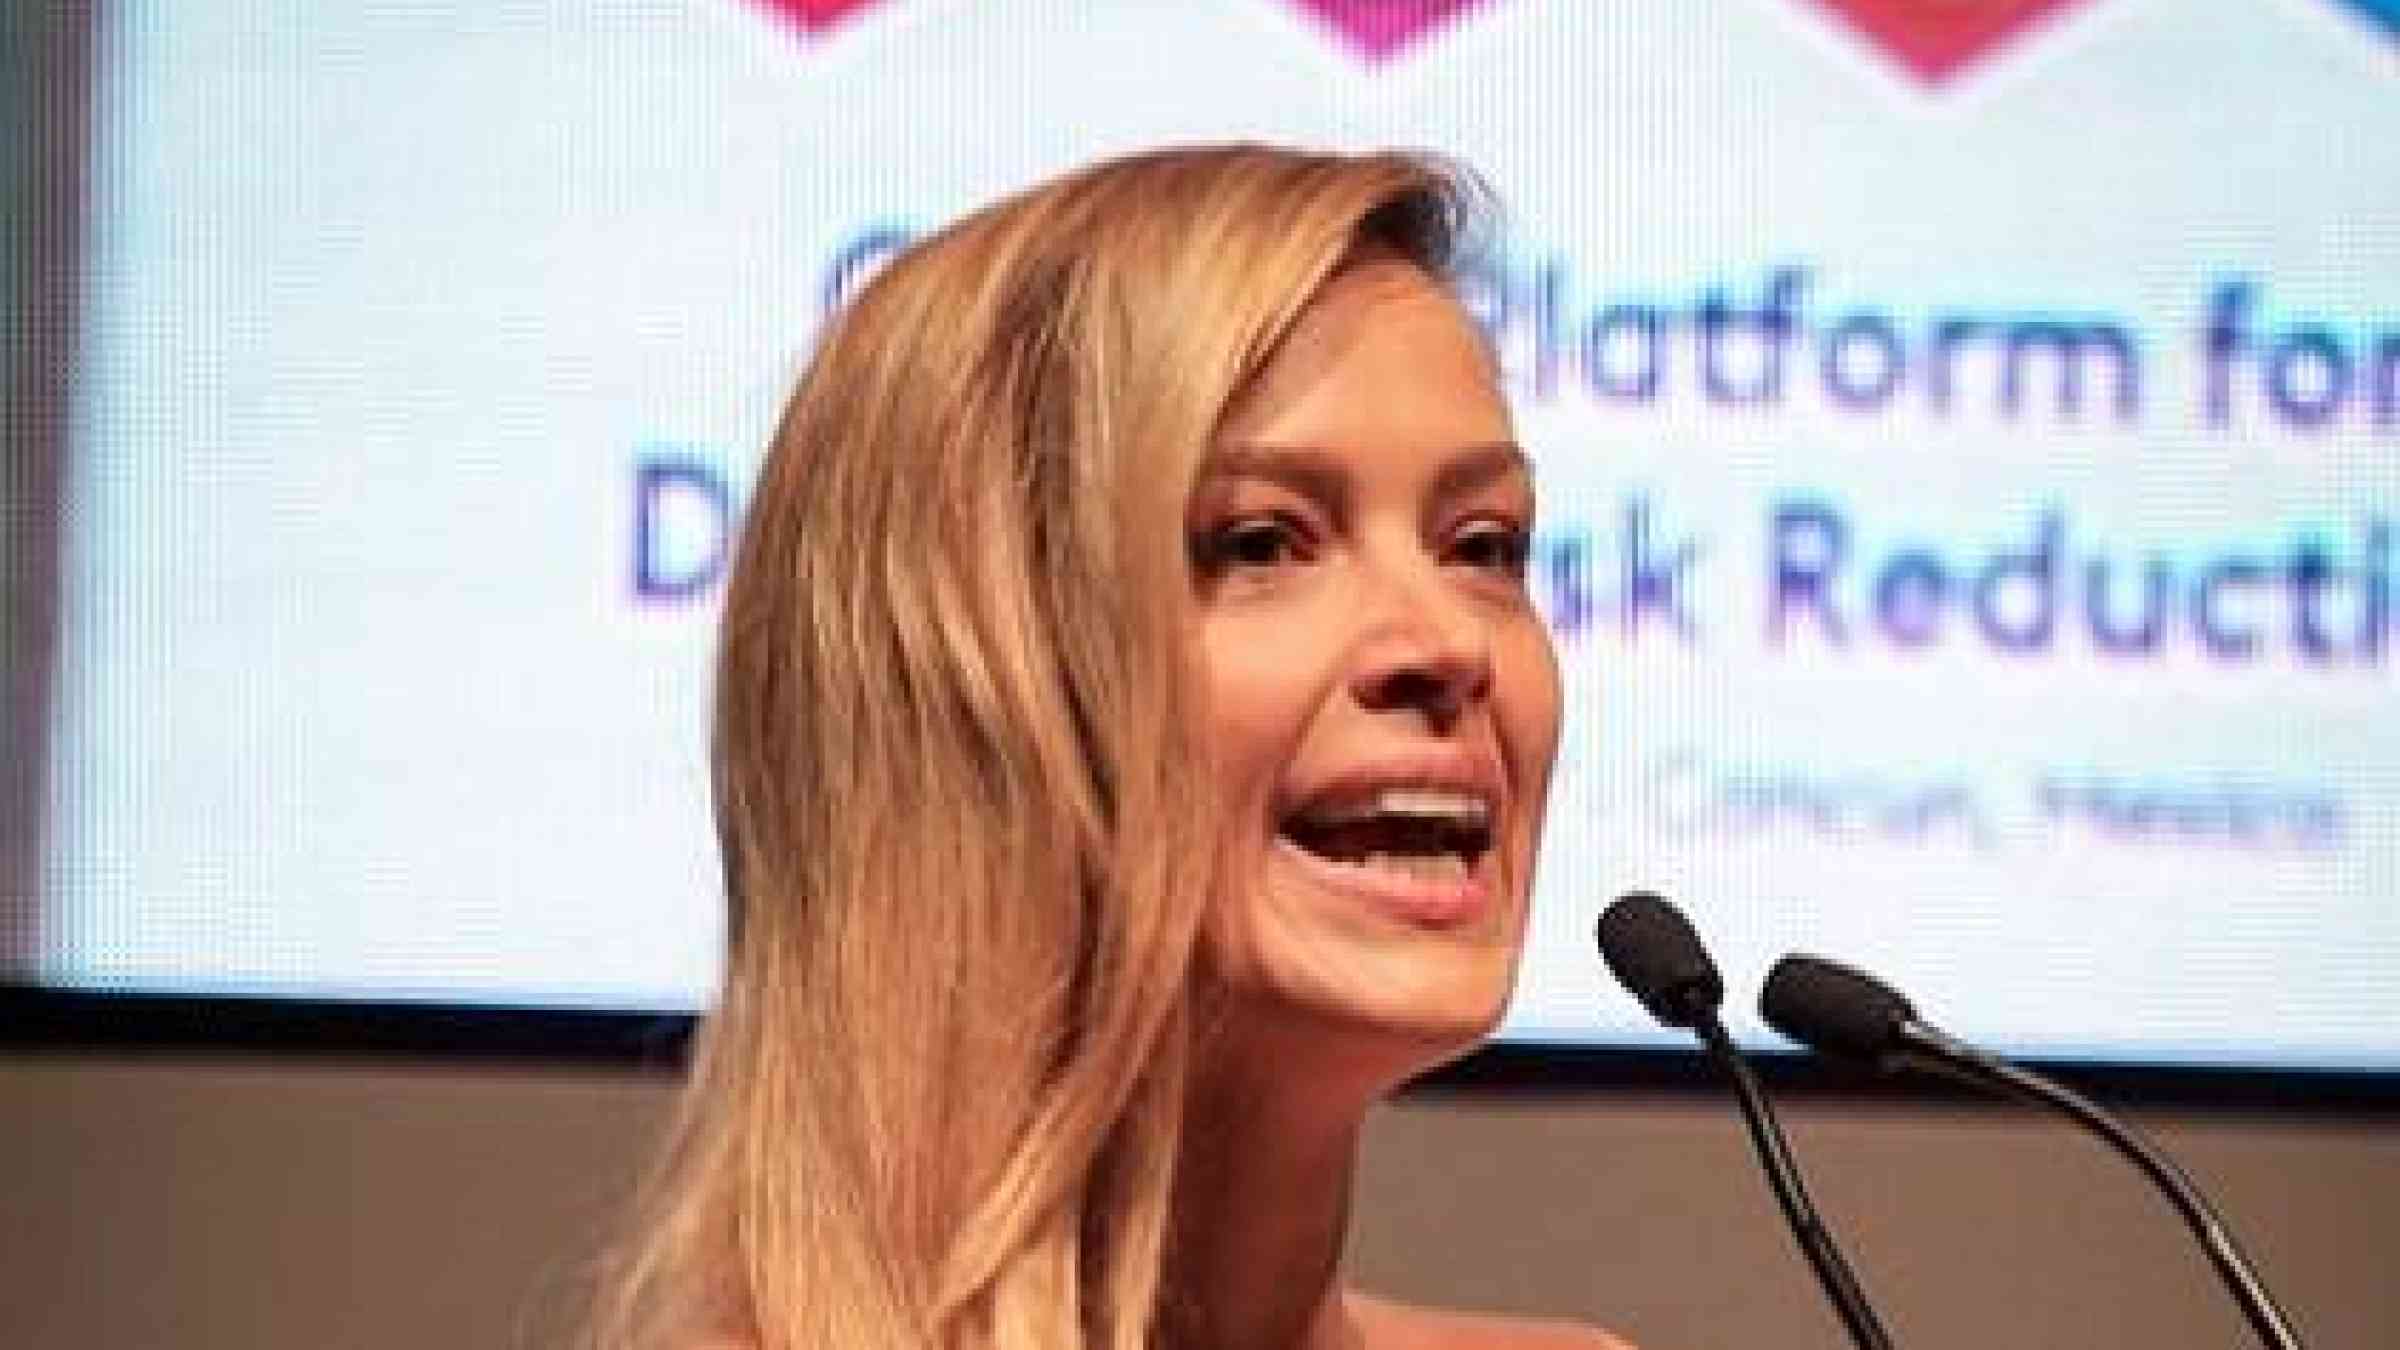 Tsunami survivor and campaigner, Petra Nemcova, speaking to the Multi-Hazard Early Warning Conference